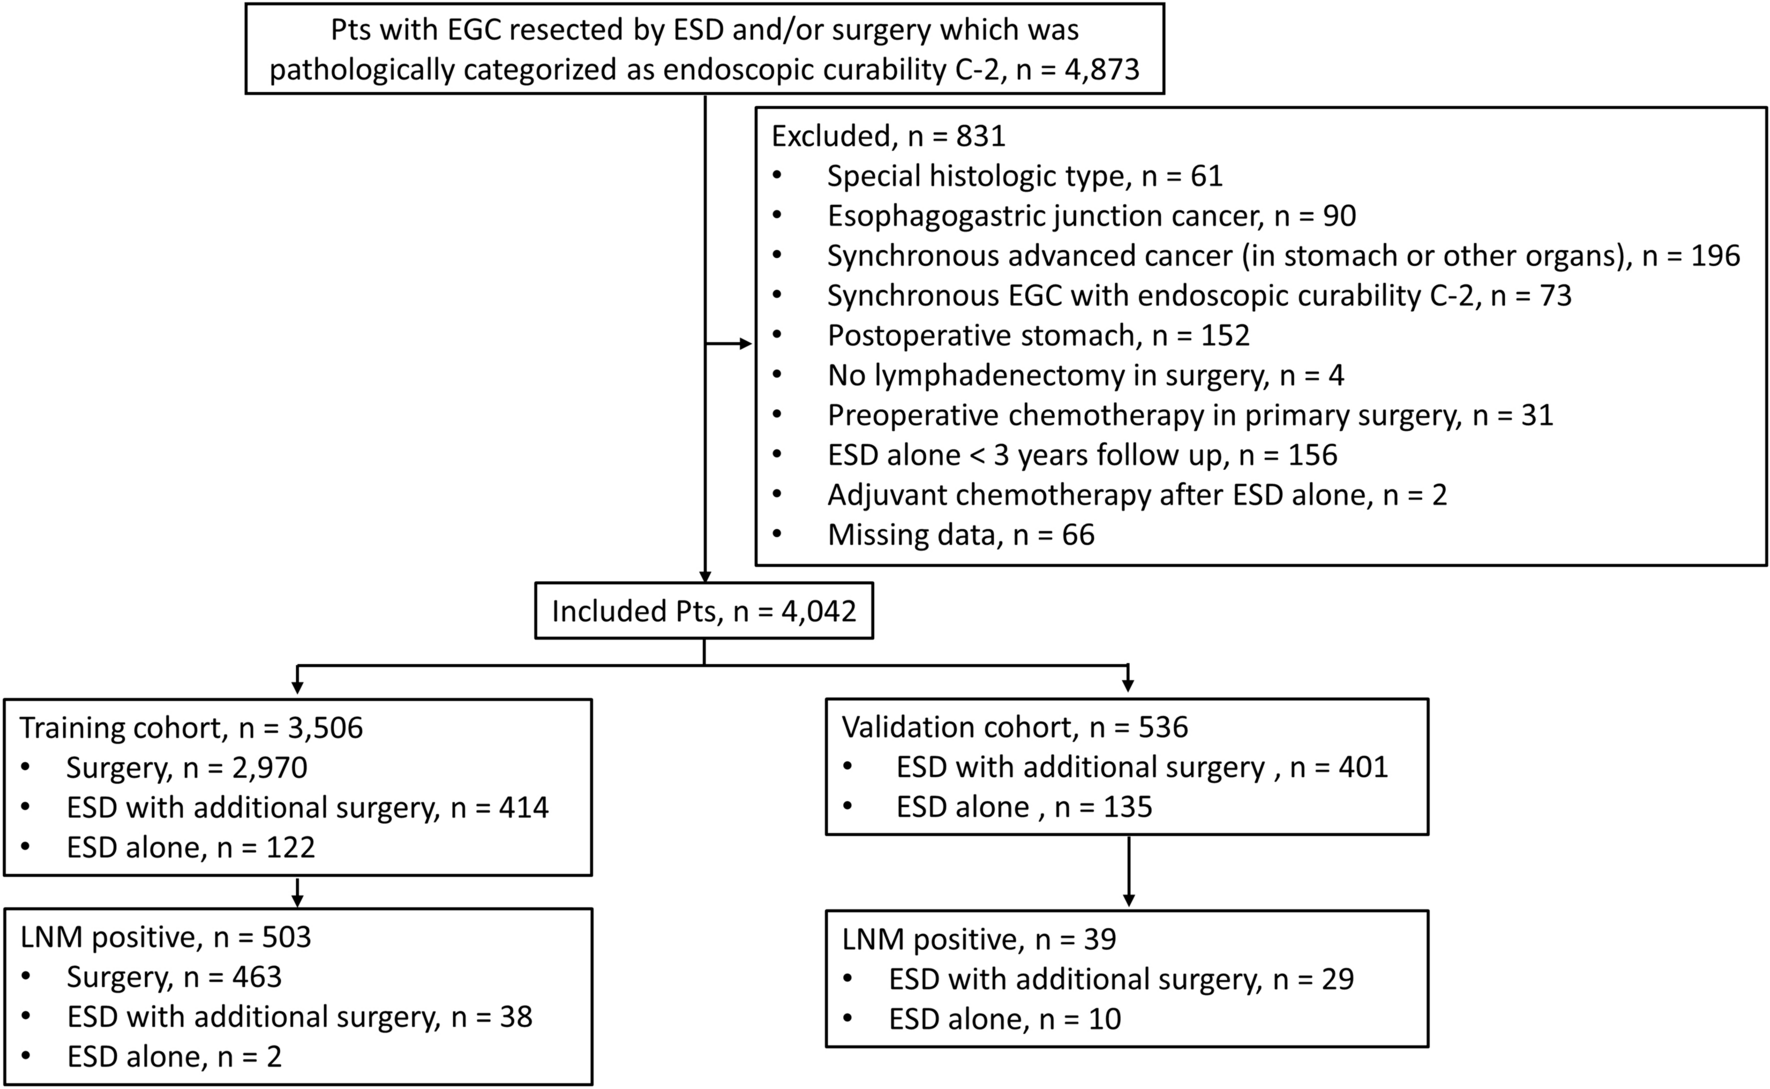 A machine learning model for predicting the lymph node metastasis of early gastric cancer not meeting the endoscopic curability criteria